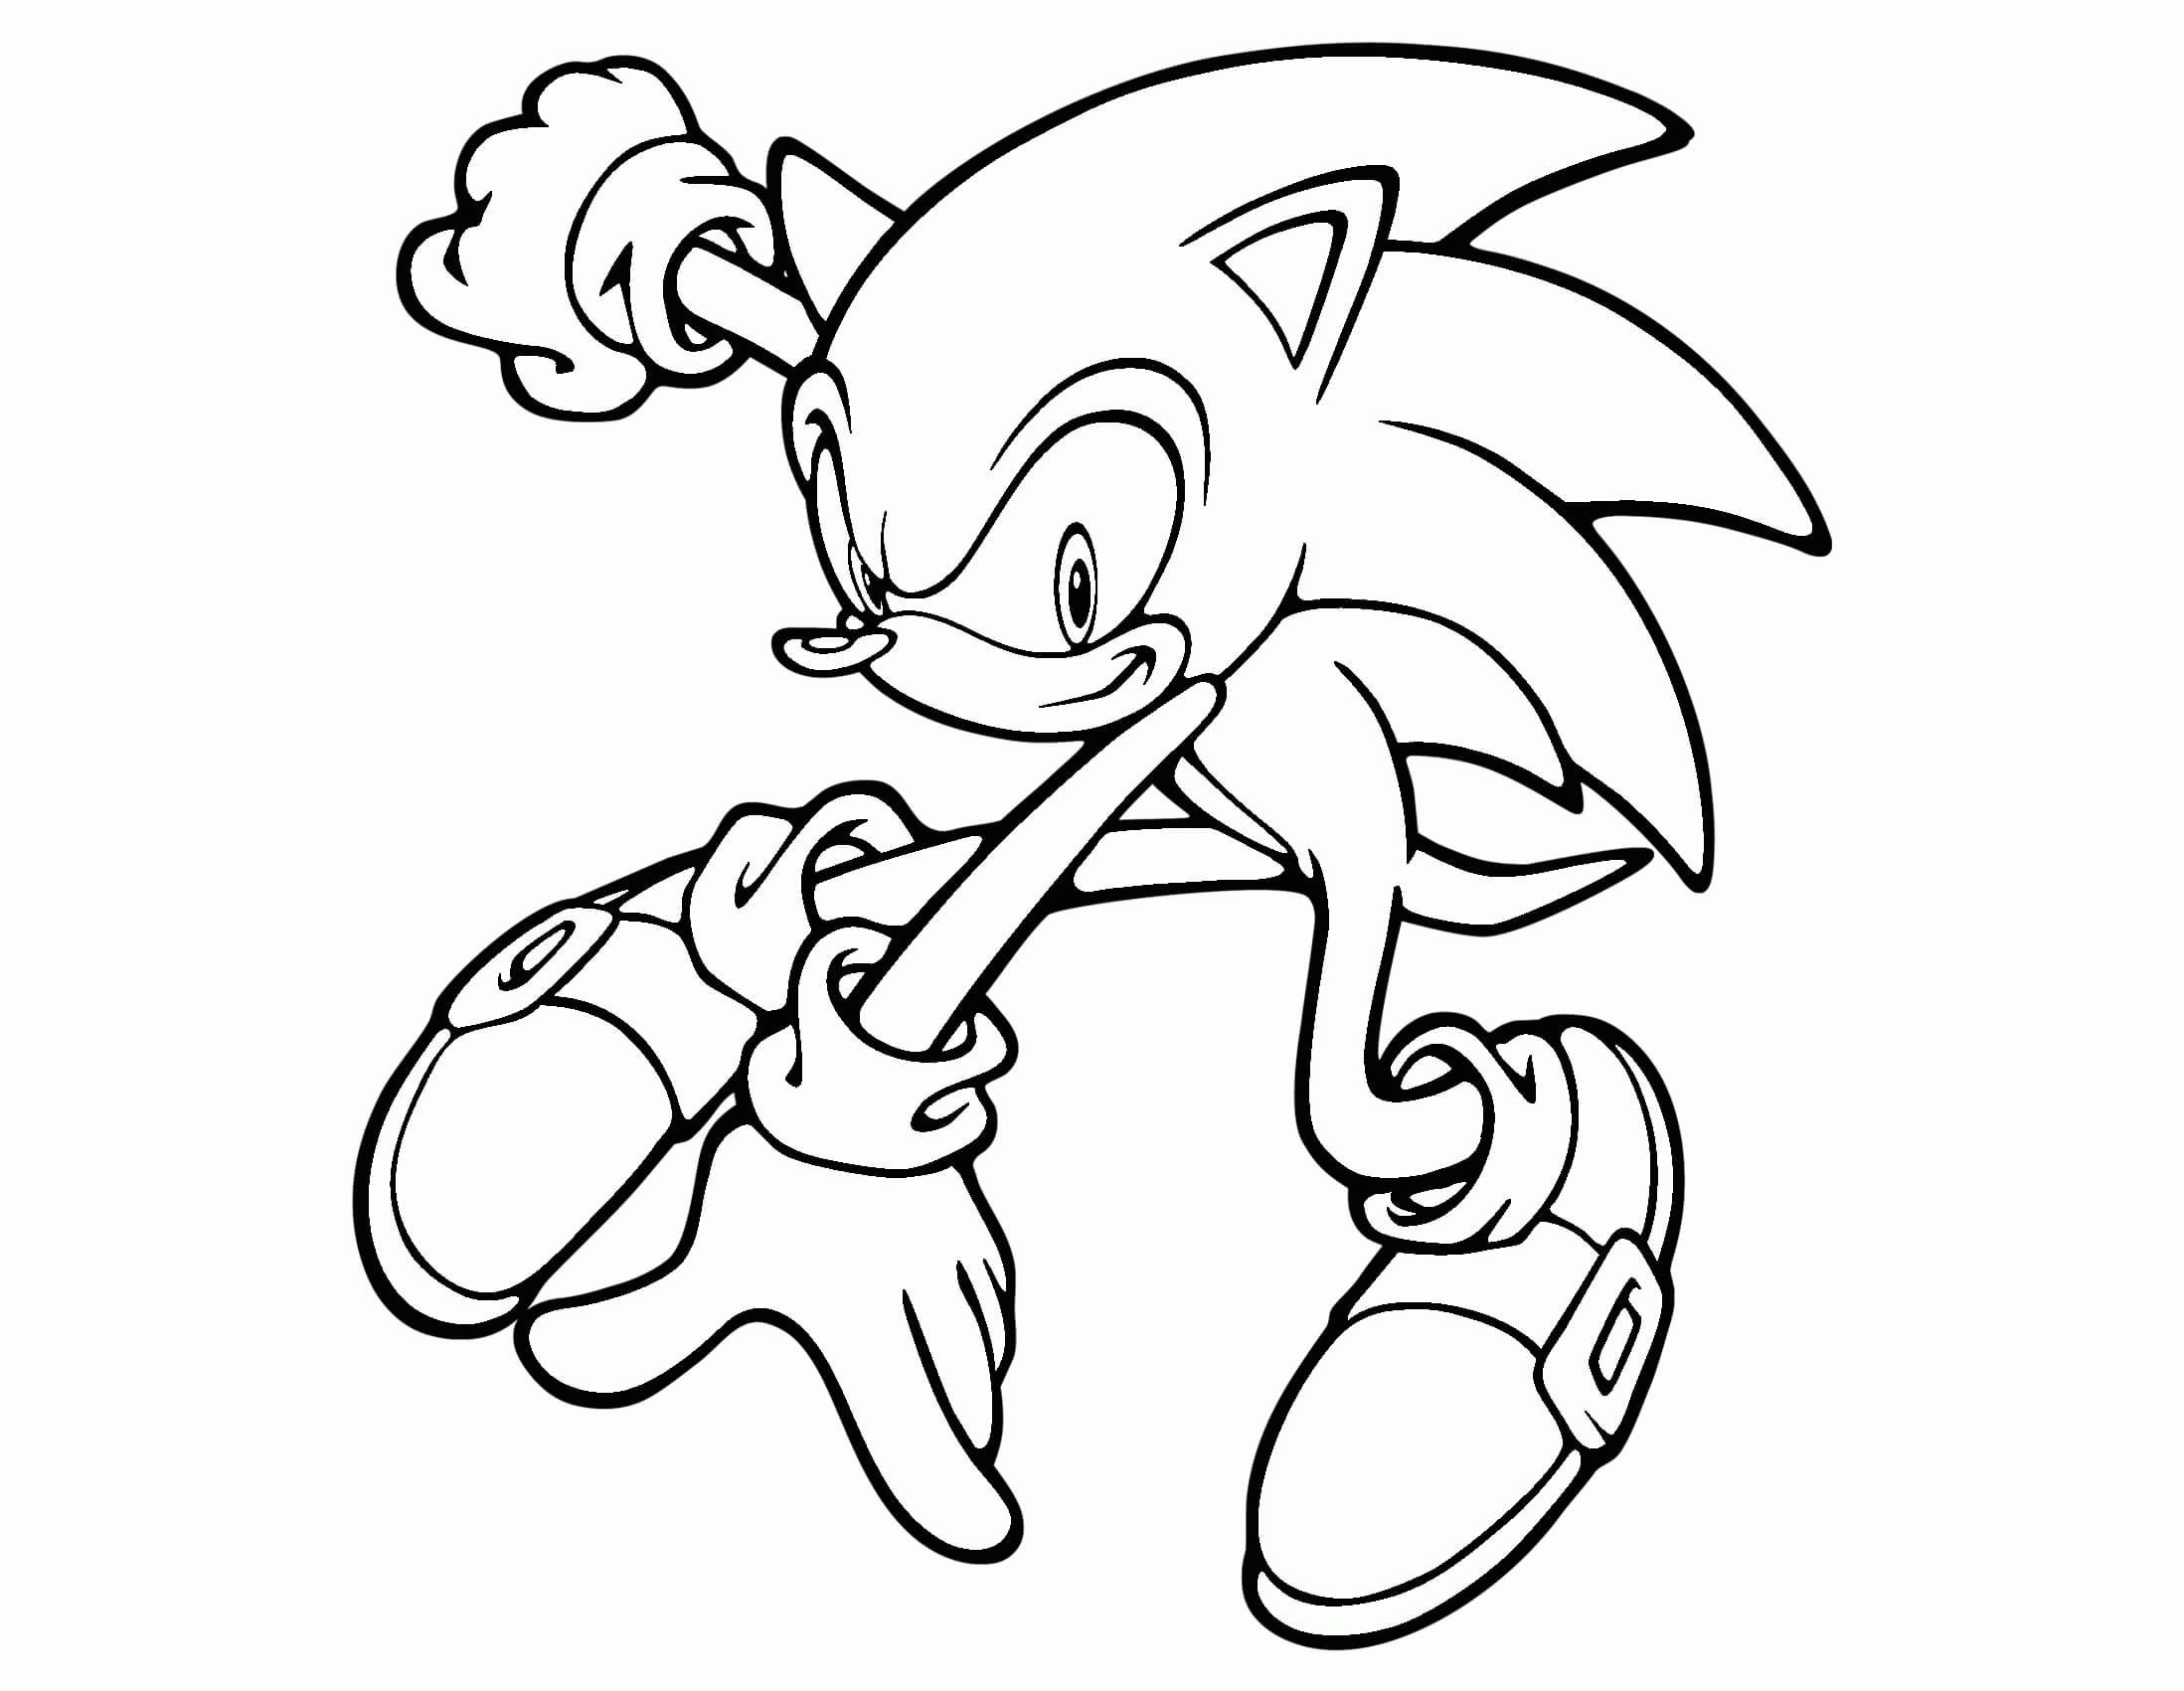 Sonic Coloring Pages To Print Free Sonic The Werehog Coloring ...